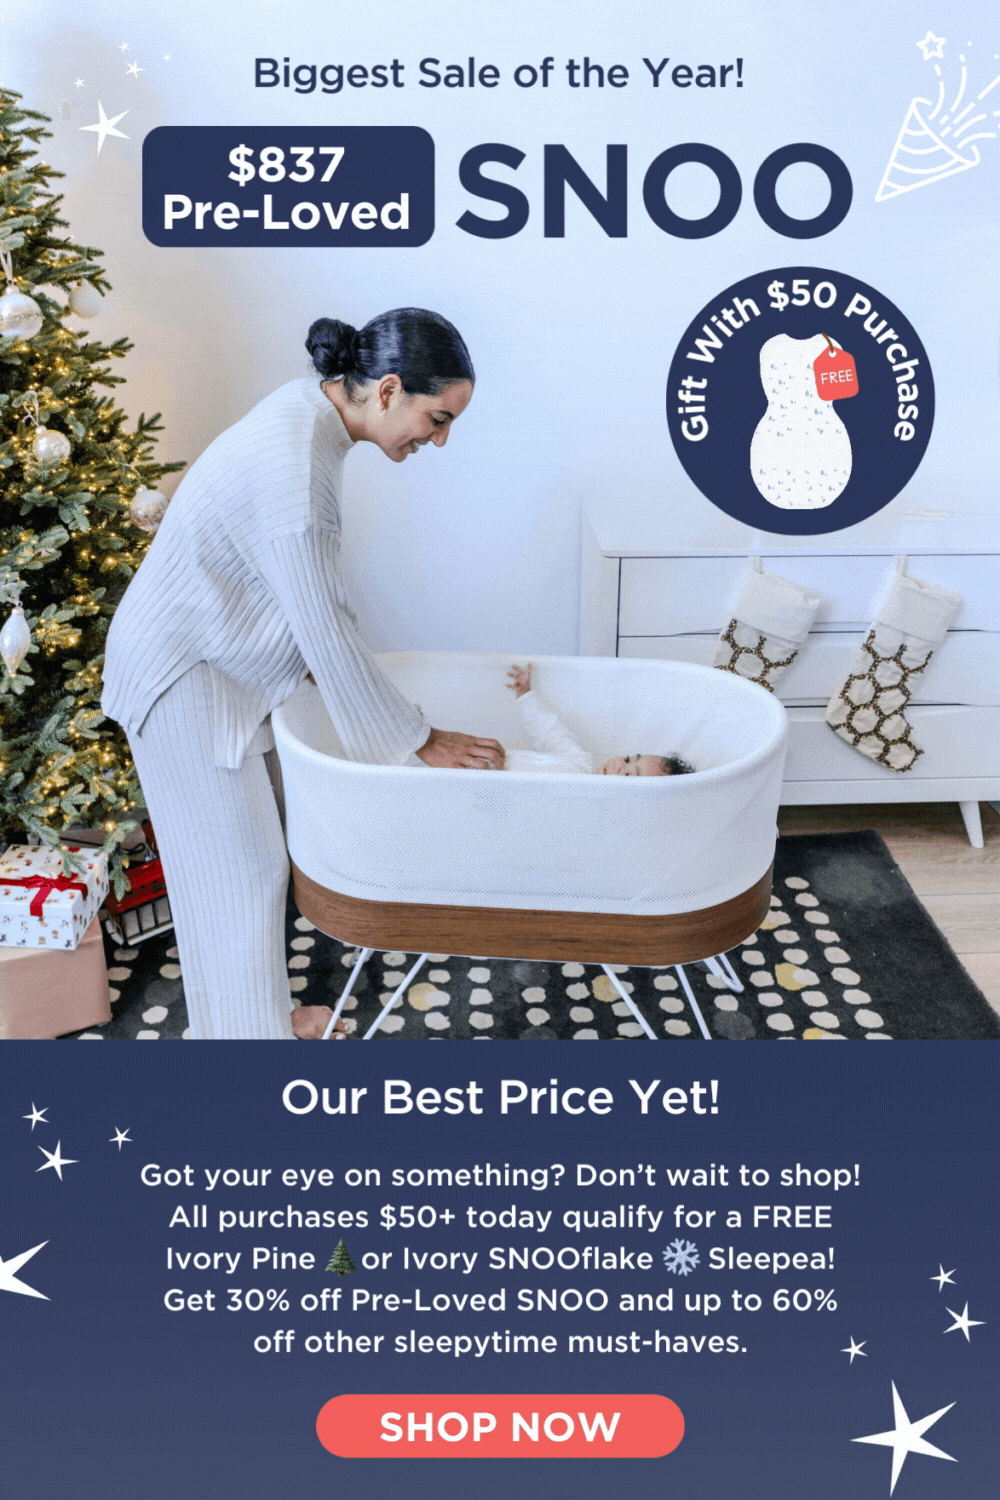 Biggest Sale of the Year! \\$837 Pre-Loved SNOO. Gift With \\$50 Purchase. Our Best Price Yet! Got your eye on something? Don’t wait to shop! All purchases \\$50+ today qualify for a FREE Ivory Pine or Ivory SNOOflake Sleepea! Get 30% off Pre-Loved SNOO and up to 60% off other sleepytime must-haves. SHOP NOW